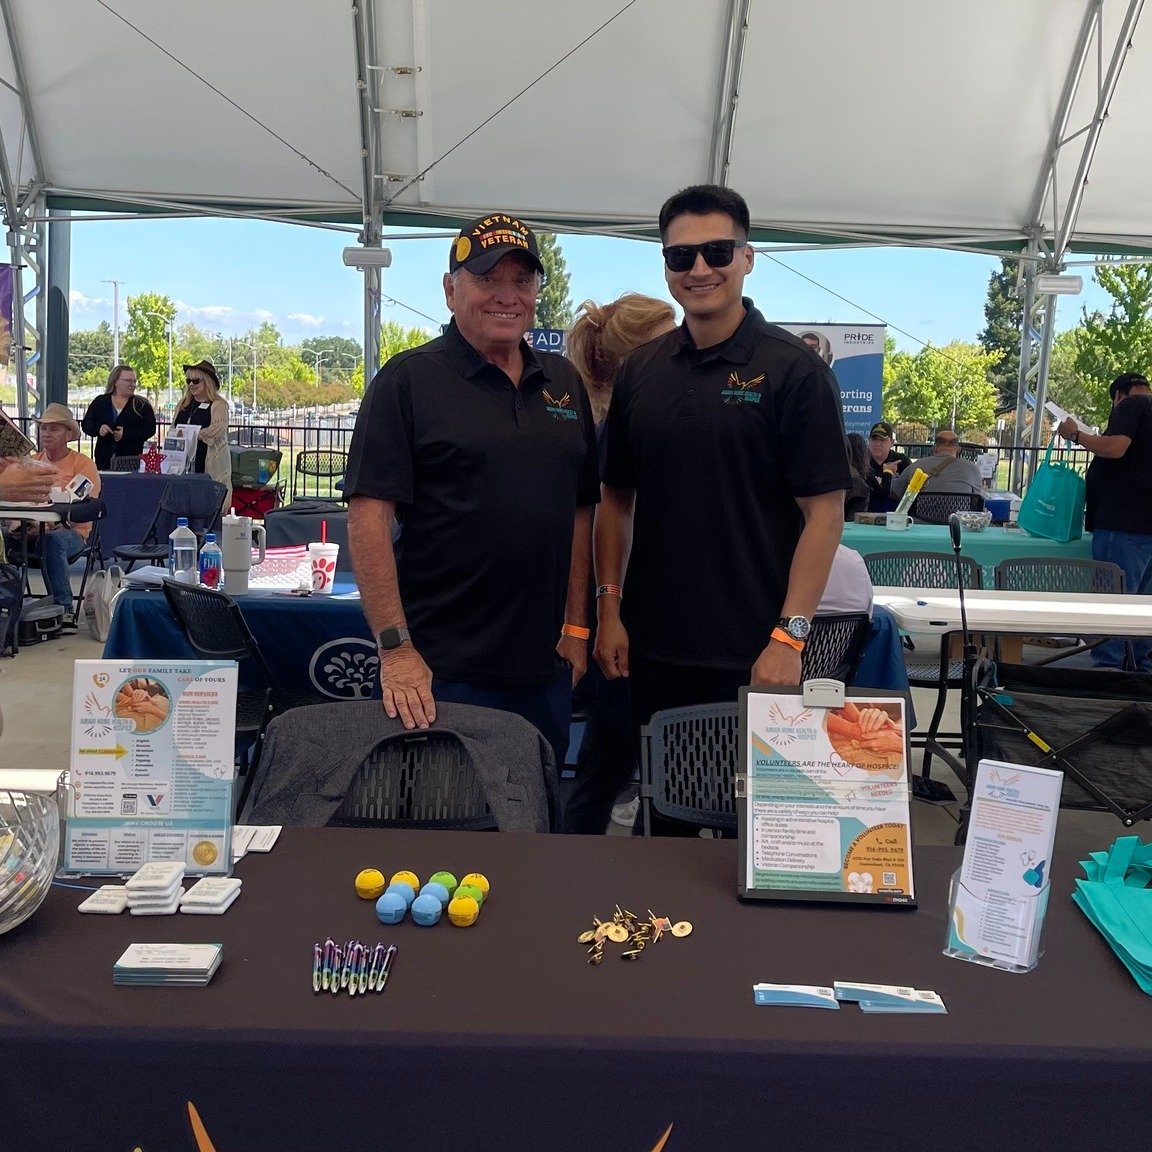 🌟What a memorable event last week our Amari team had at the Placer Veterans Stand Down! 🇺🇸

With over 600 low-income or homeless veterans in Placer County alone, it's essential that we come together to support those who have served our country sel